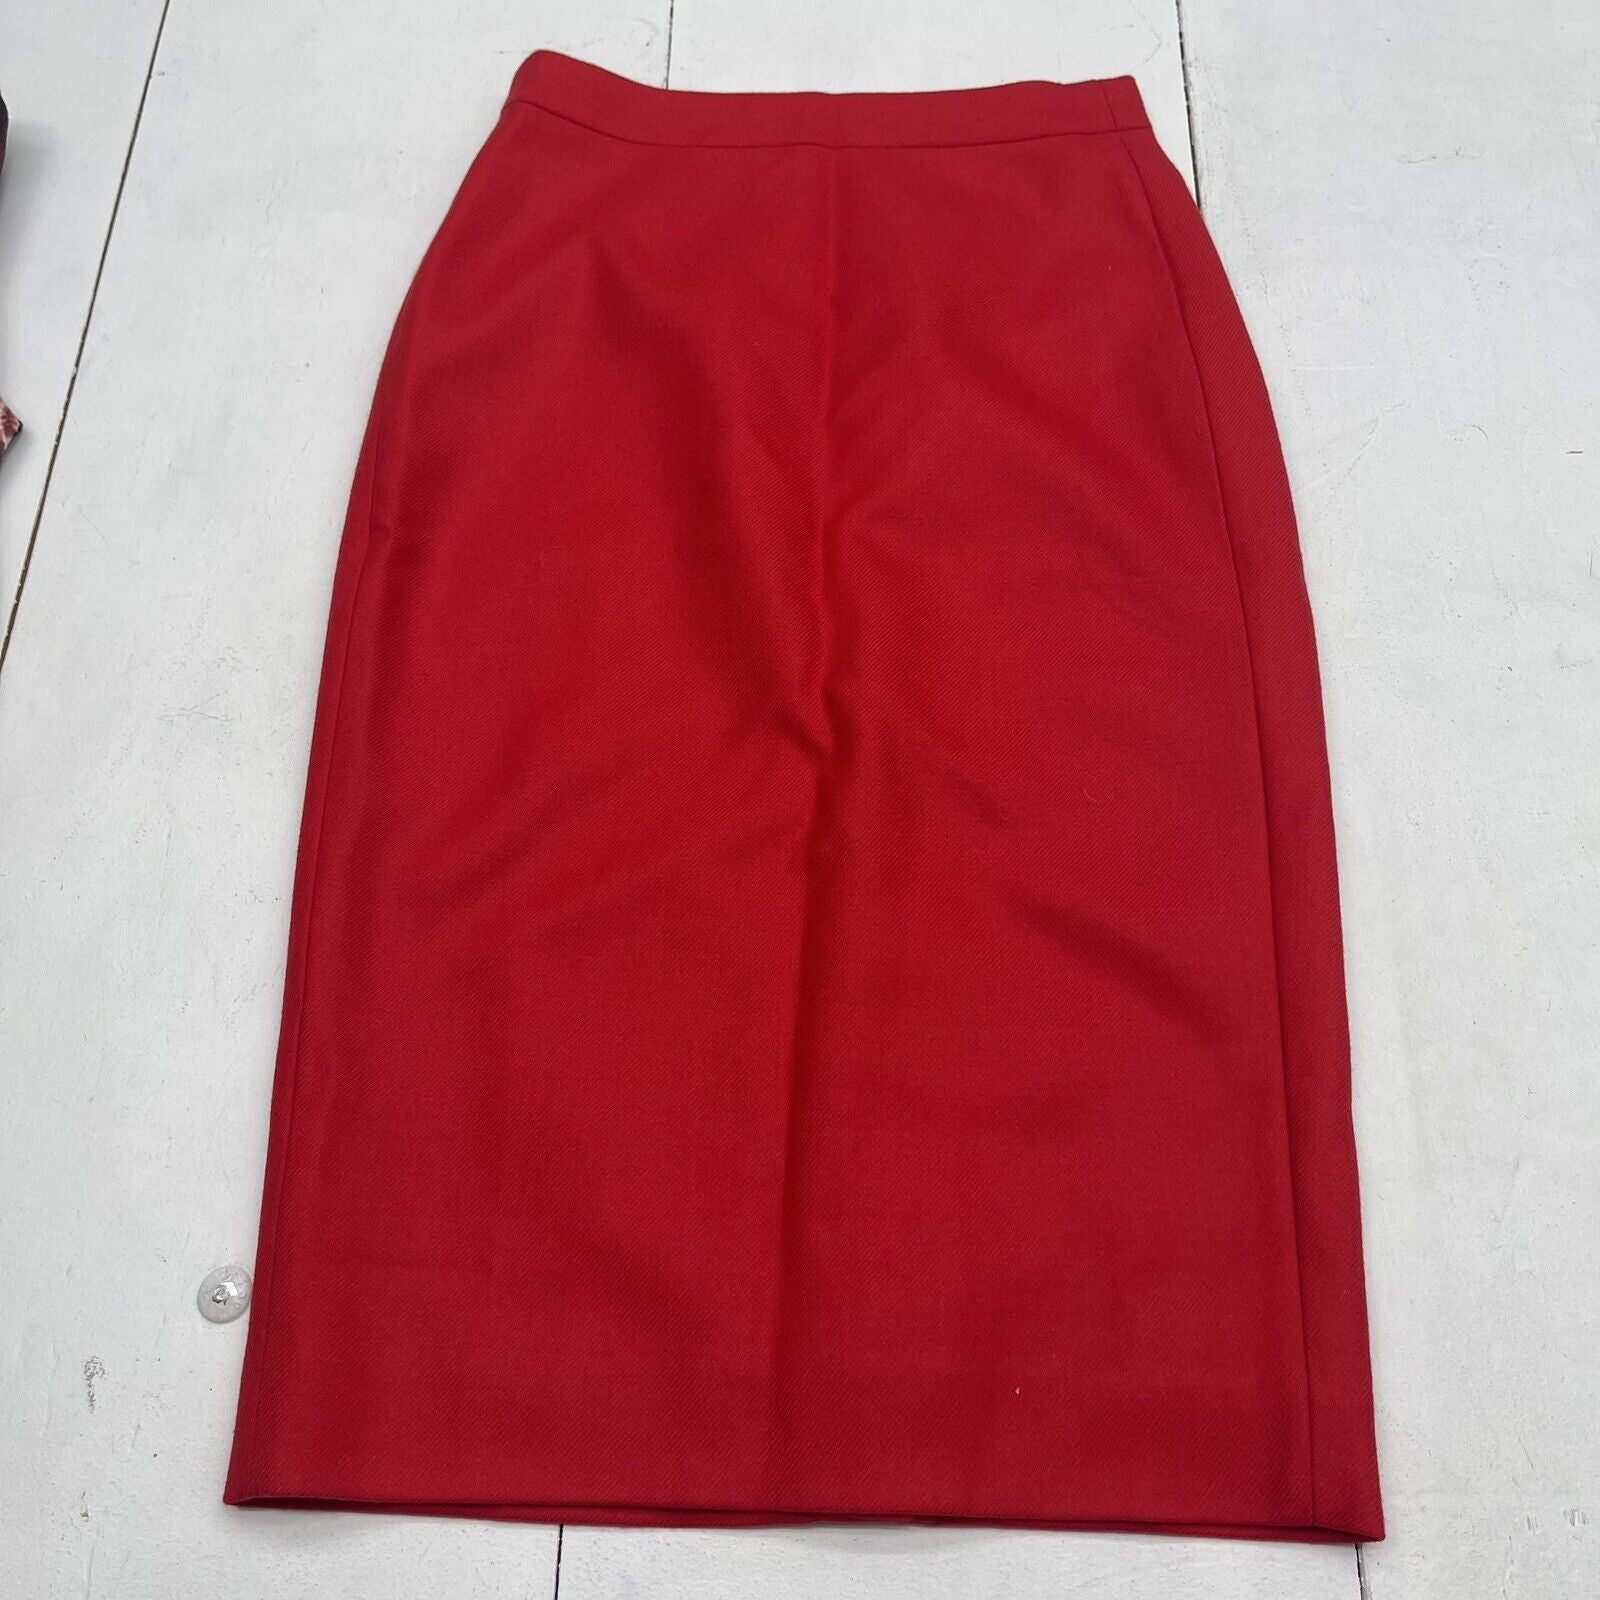 J Crew No 3 Pencil Skirt Double Serge Wool Red Women’s Size 2 New $178